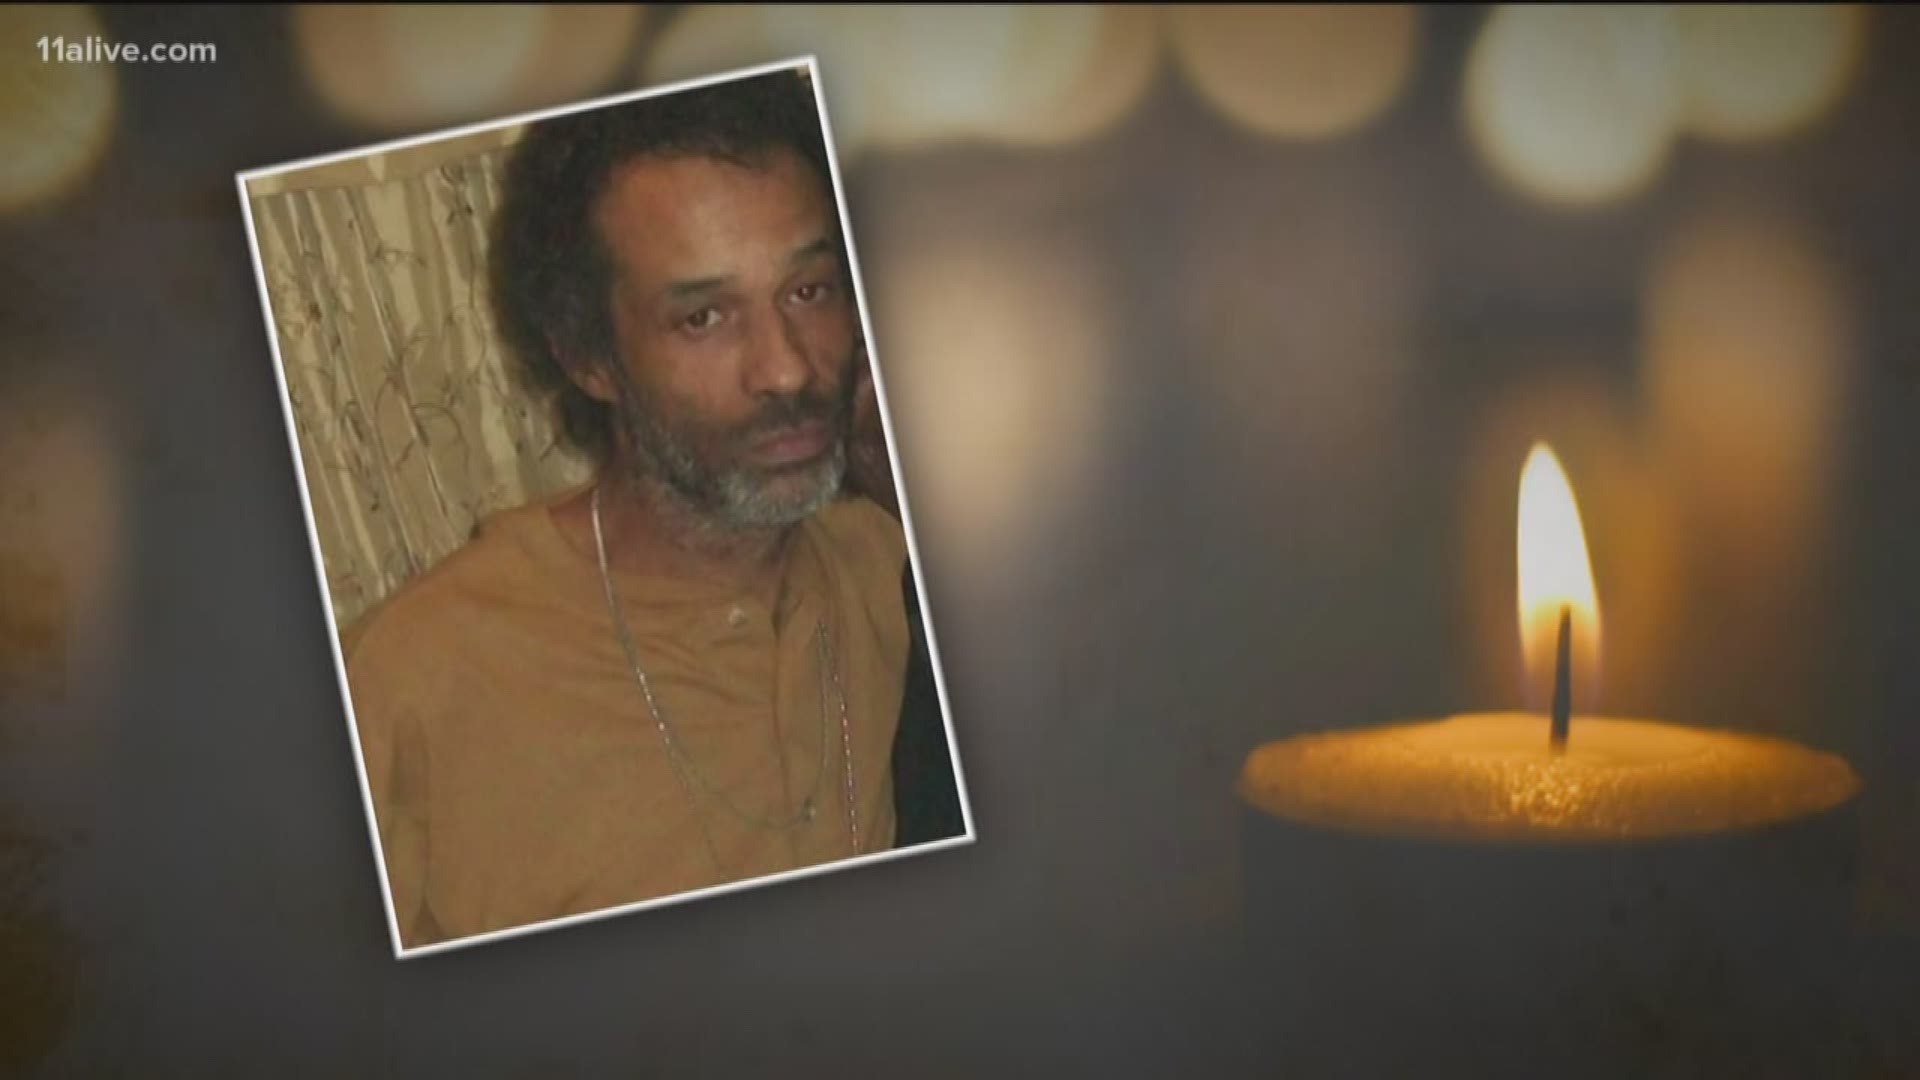 He was found in a parking garage in below freezing temperatures, wearing only a light jacket. The medical examiner says he likely died of hypothermia. He was 57.